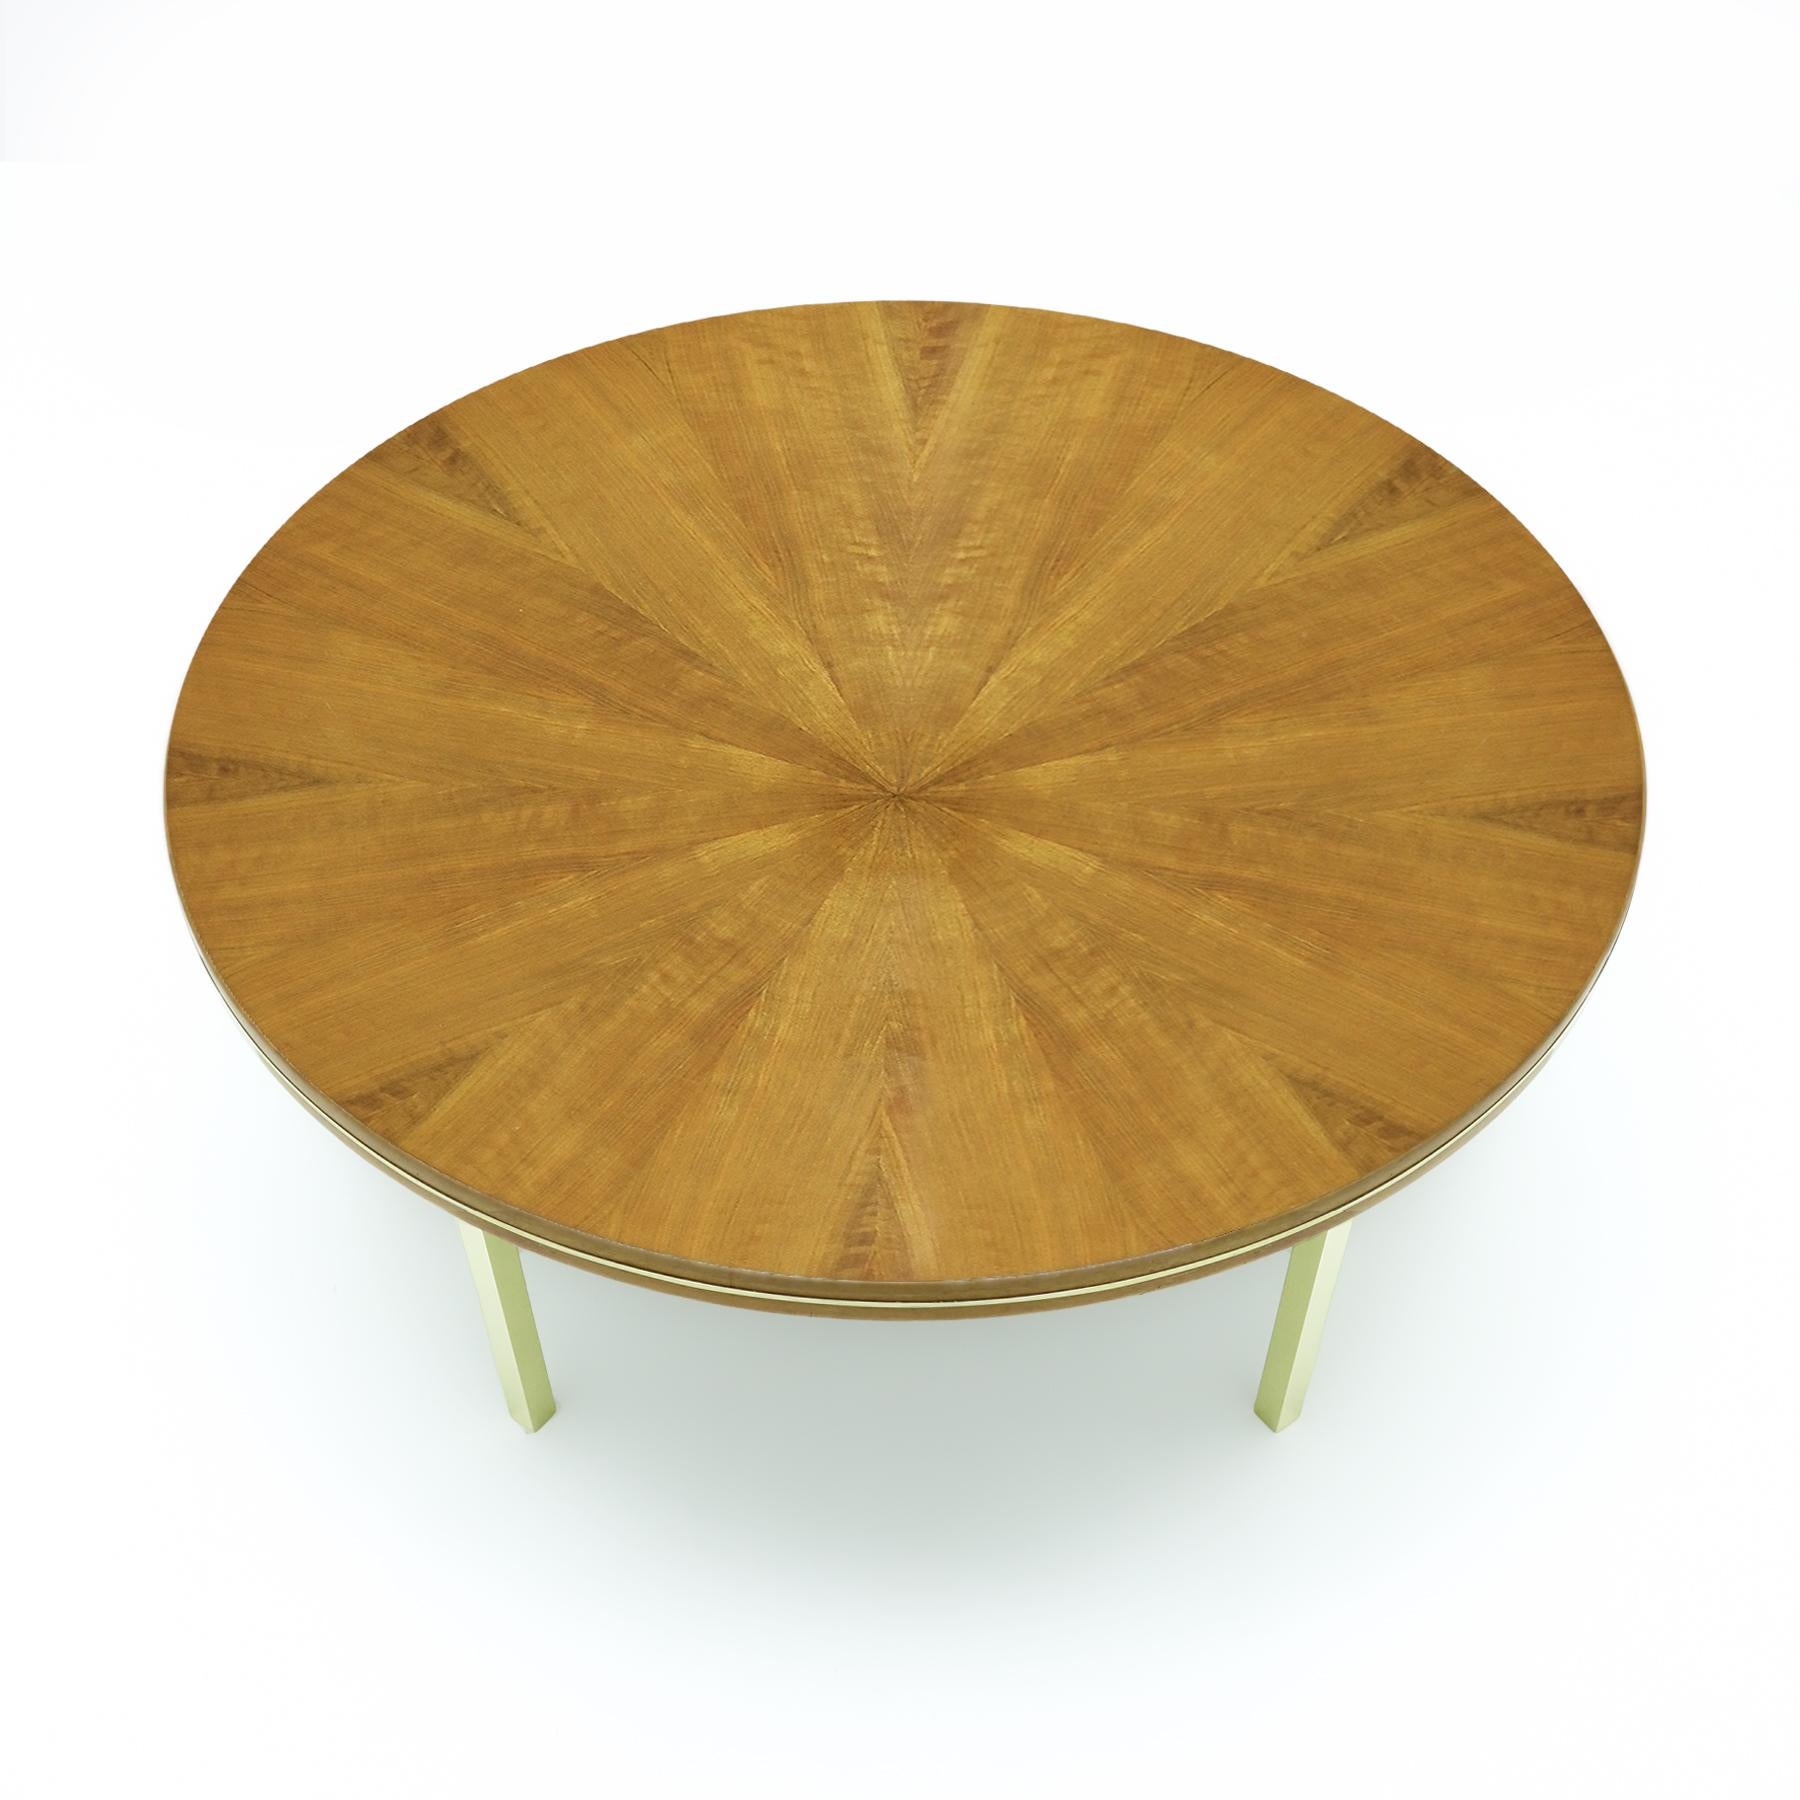 Exceptional vintage Italian teak Sunburst effect coffee table with a satin polished brass base.

The sunburst design for table tops can be found in many vintage mid century designs from Denmark, in the Georg Jensen Kubus table, to the UK with tables